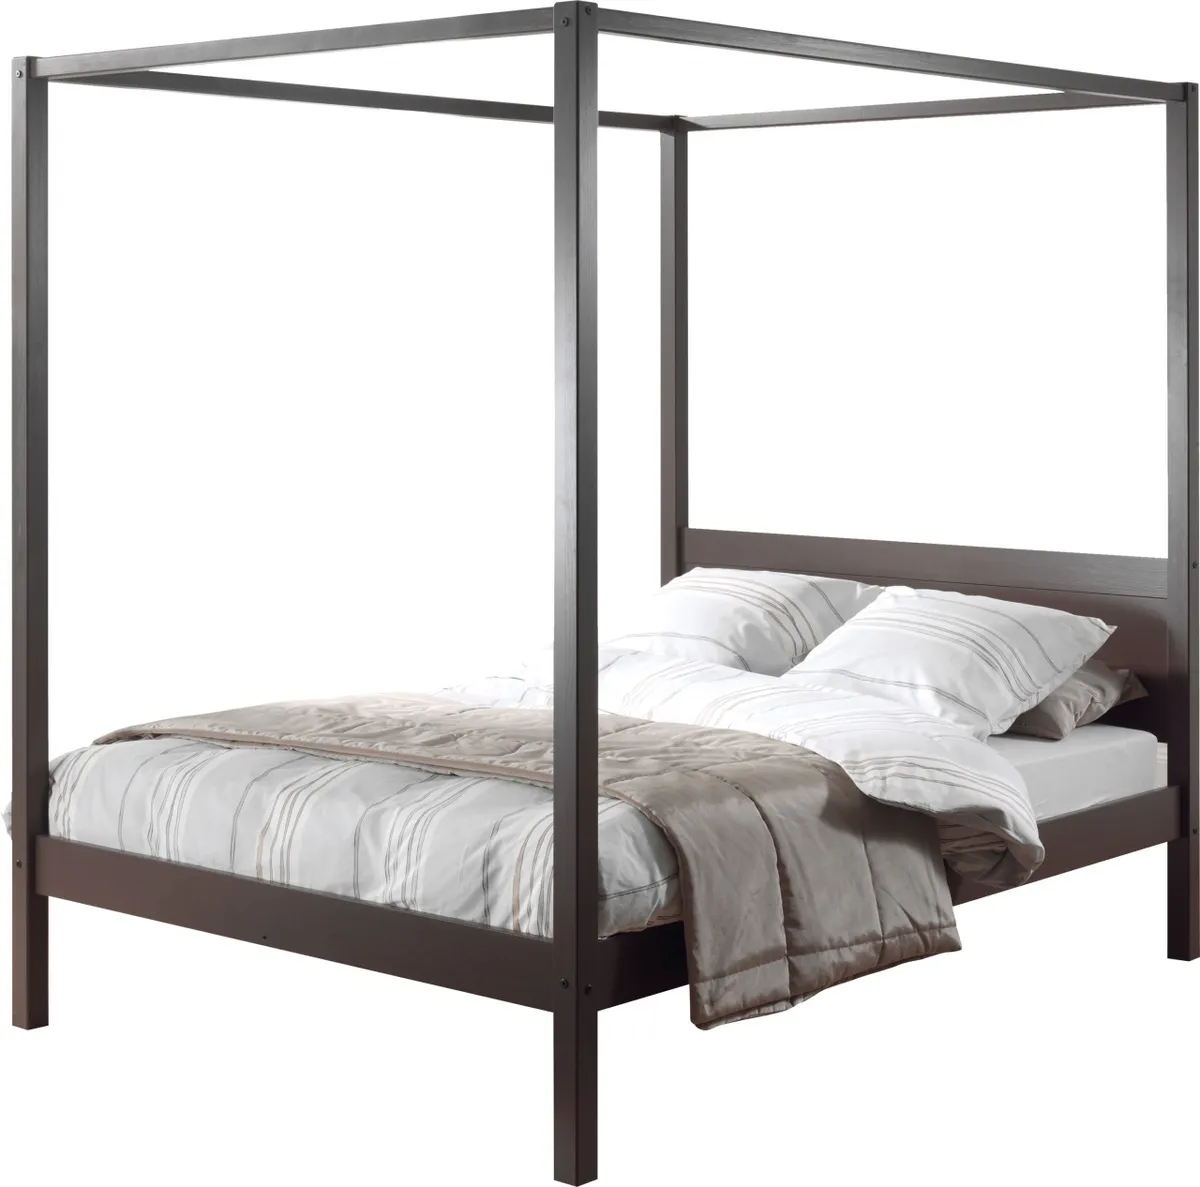 Add drama to a small bedroom with a striking slimline contemporary four-poster bed. Pino four-poster bed, £345, Cuckooland